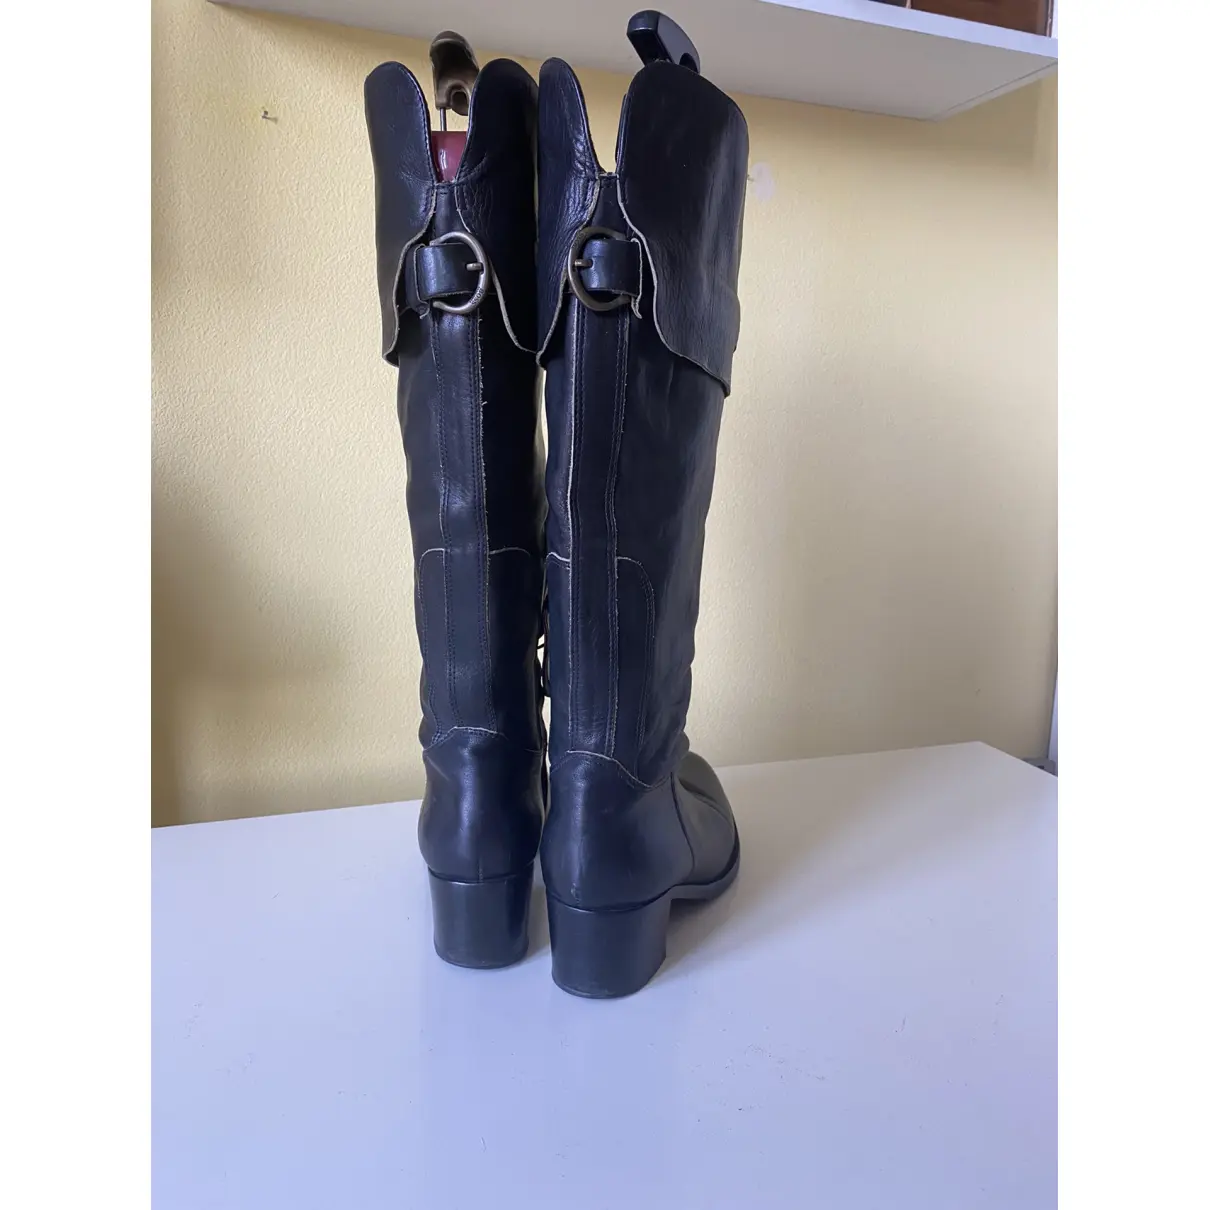 Buy Boss Leather riding boots online